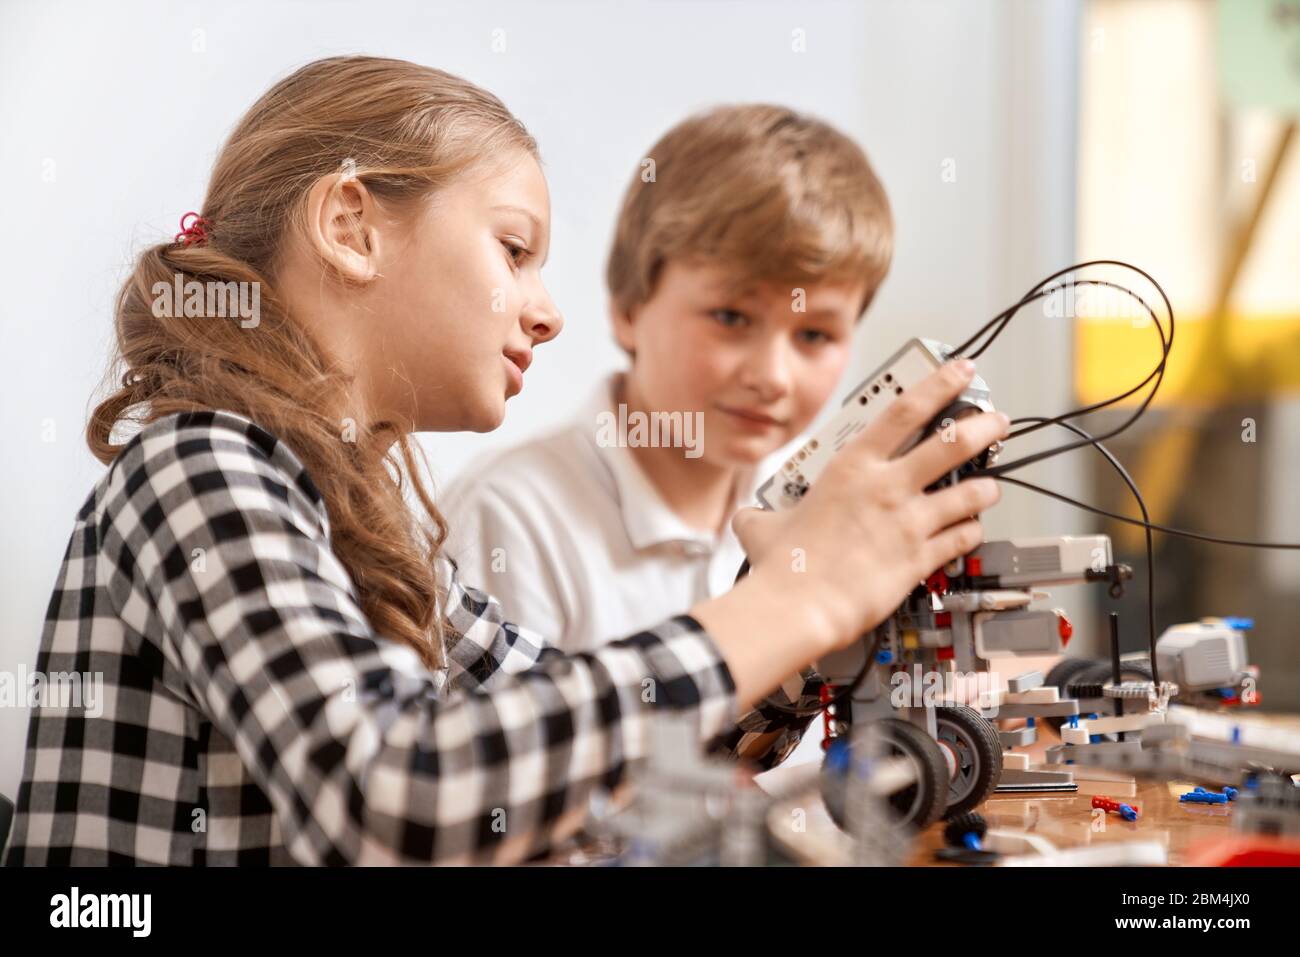 Side view of boy helping girl in creating robot using building kit for kids on table. Nice interested friends smiling, chatting and working on project together. Concept of science engineering. Stock Photo